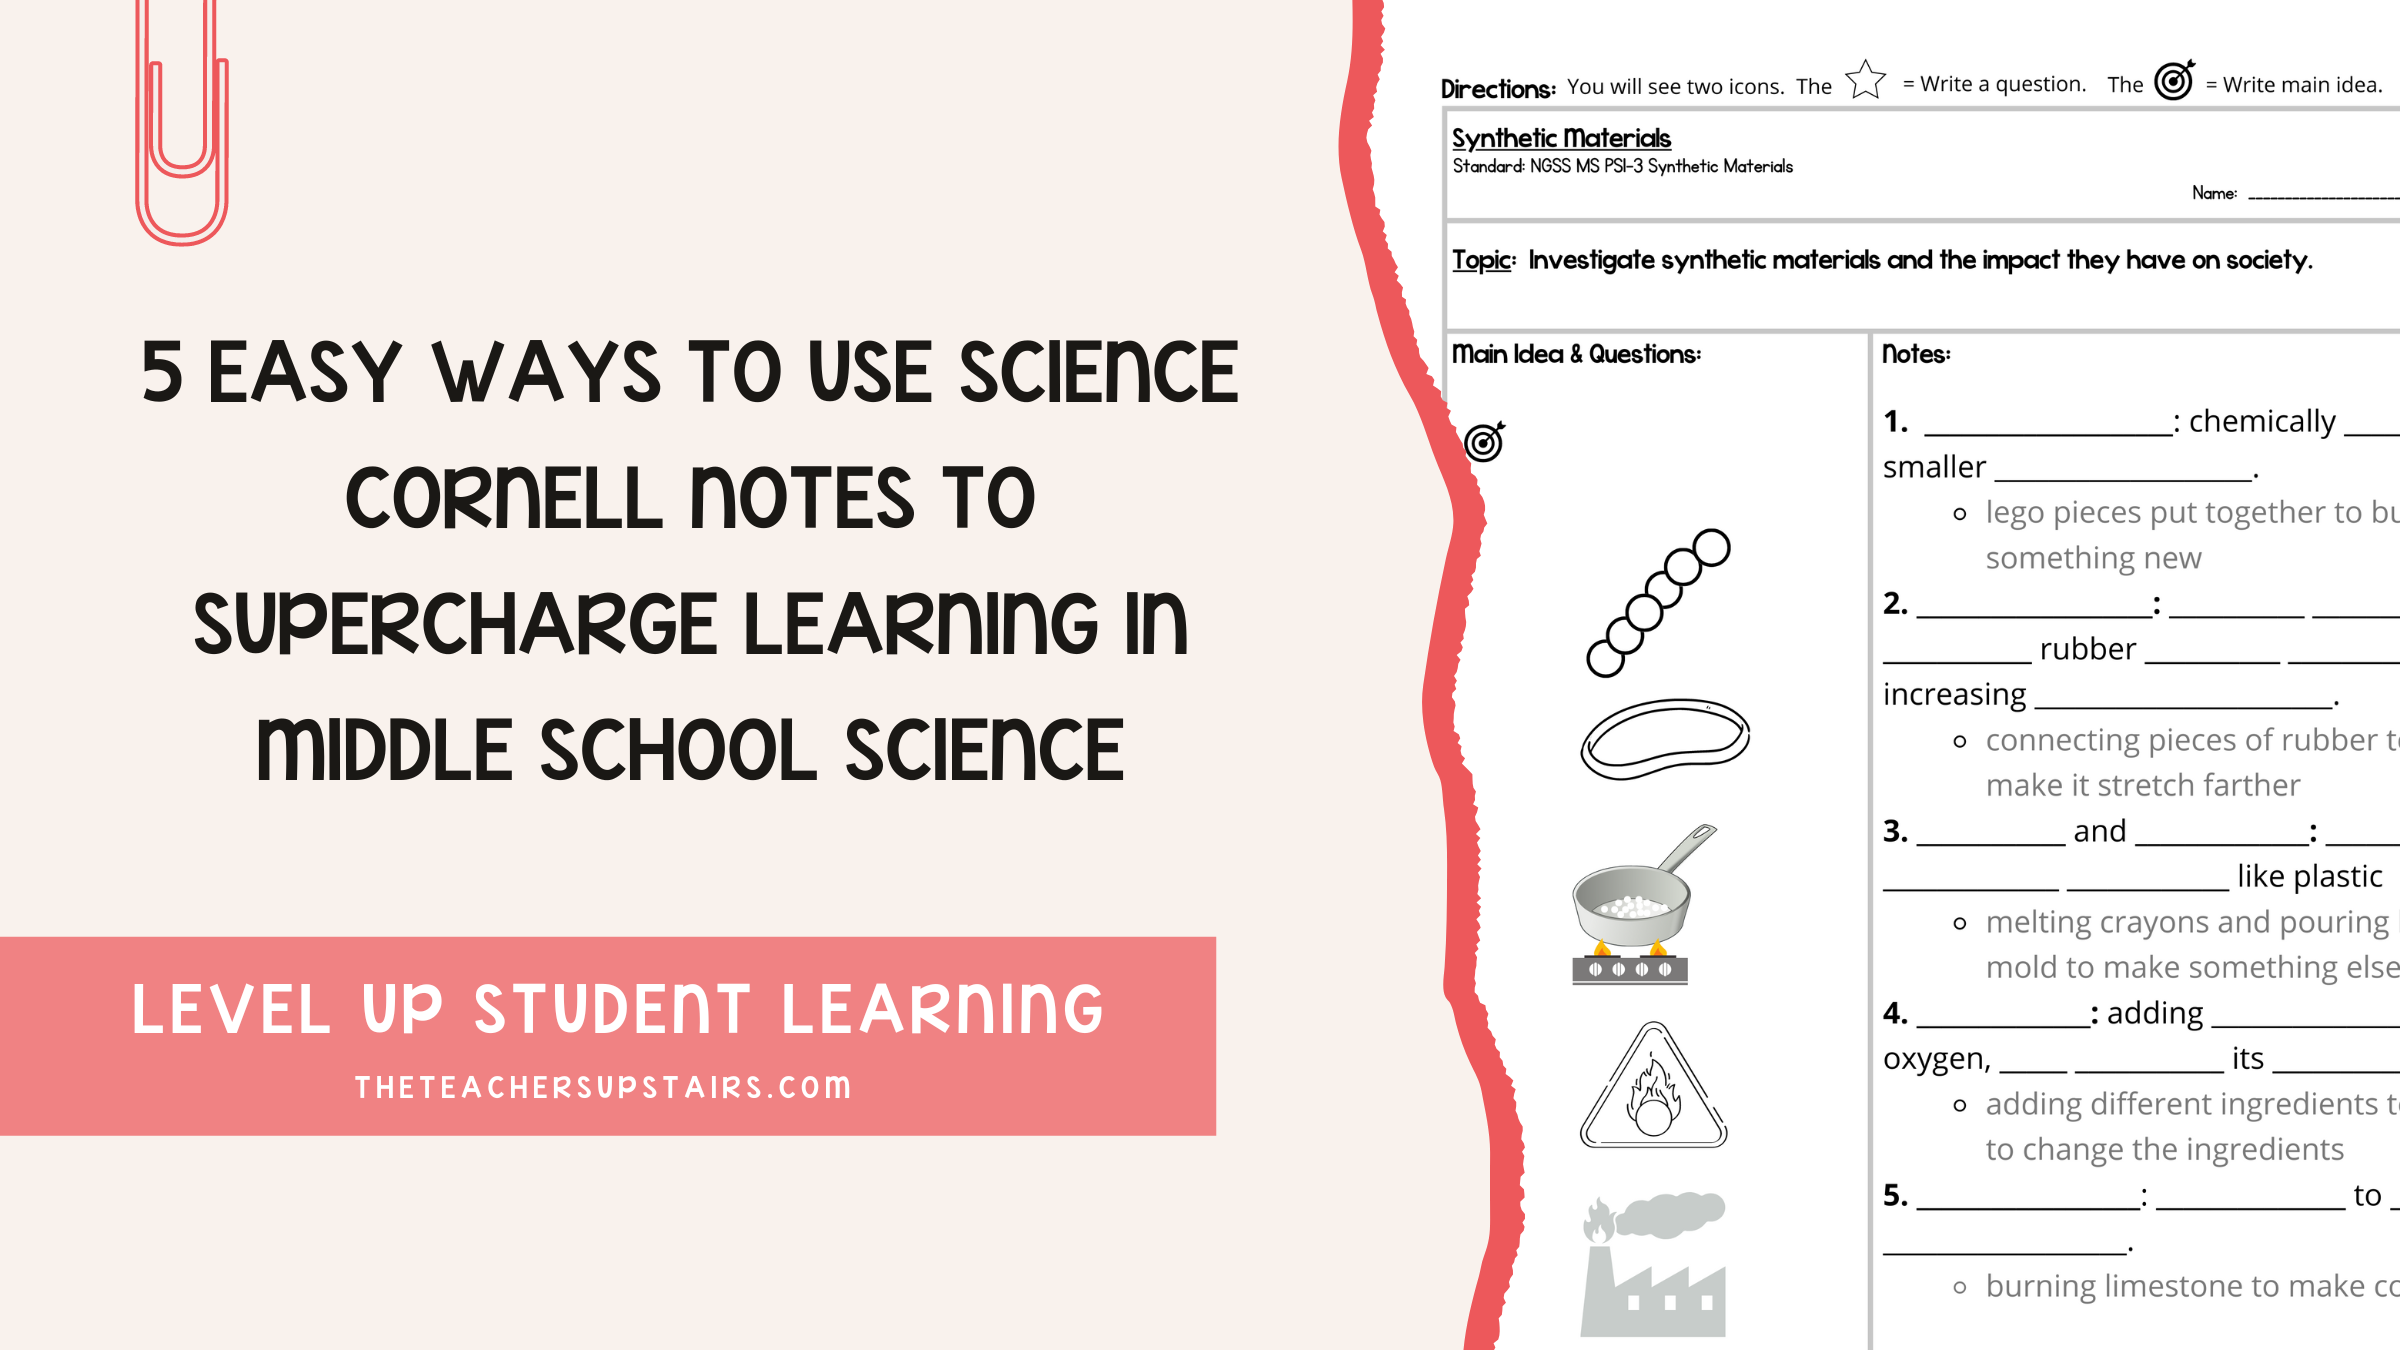 Image shows cover image for science cornell notes blog post.